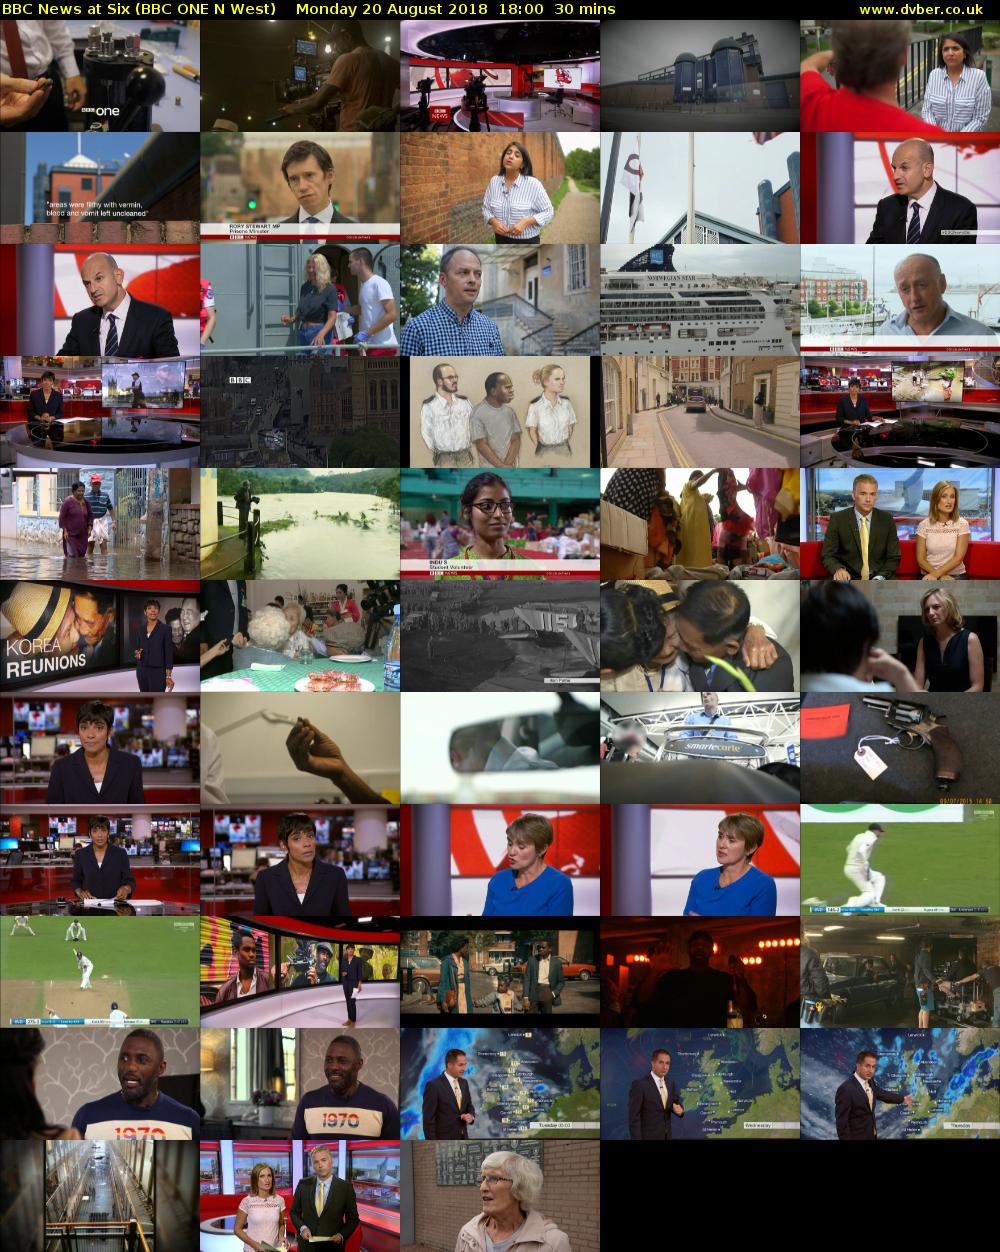 BBC News at Six (BBC ONE N West) Monday 20 August 2018 18:00 - 18:30